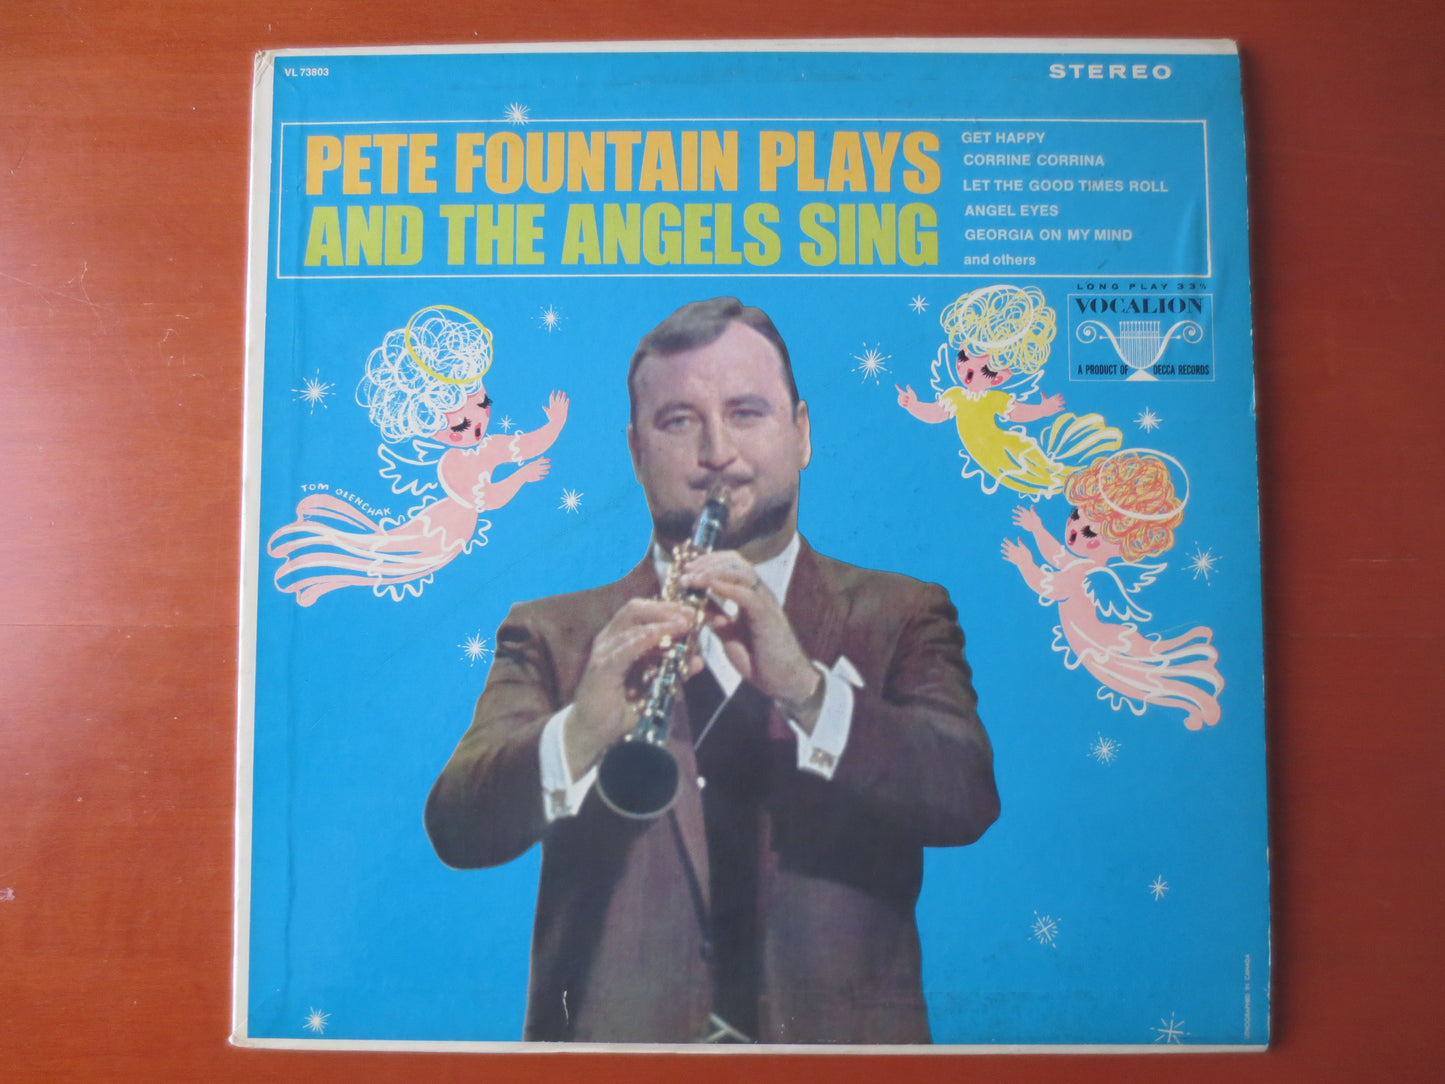 PETE FOUNTAIN, The ANGELS Sing, Pete Fountain Record, Vintage Vinyl, Pete Fountain Albums, Jazz Records, Jazz, 1967 Records